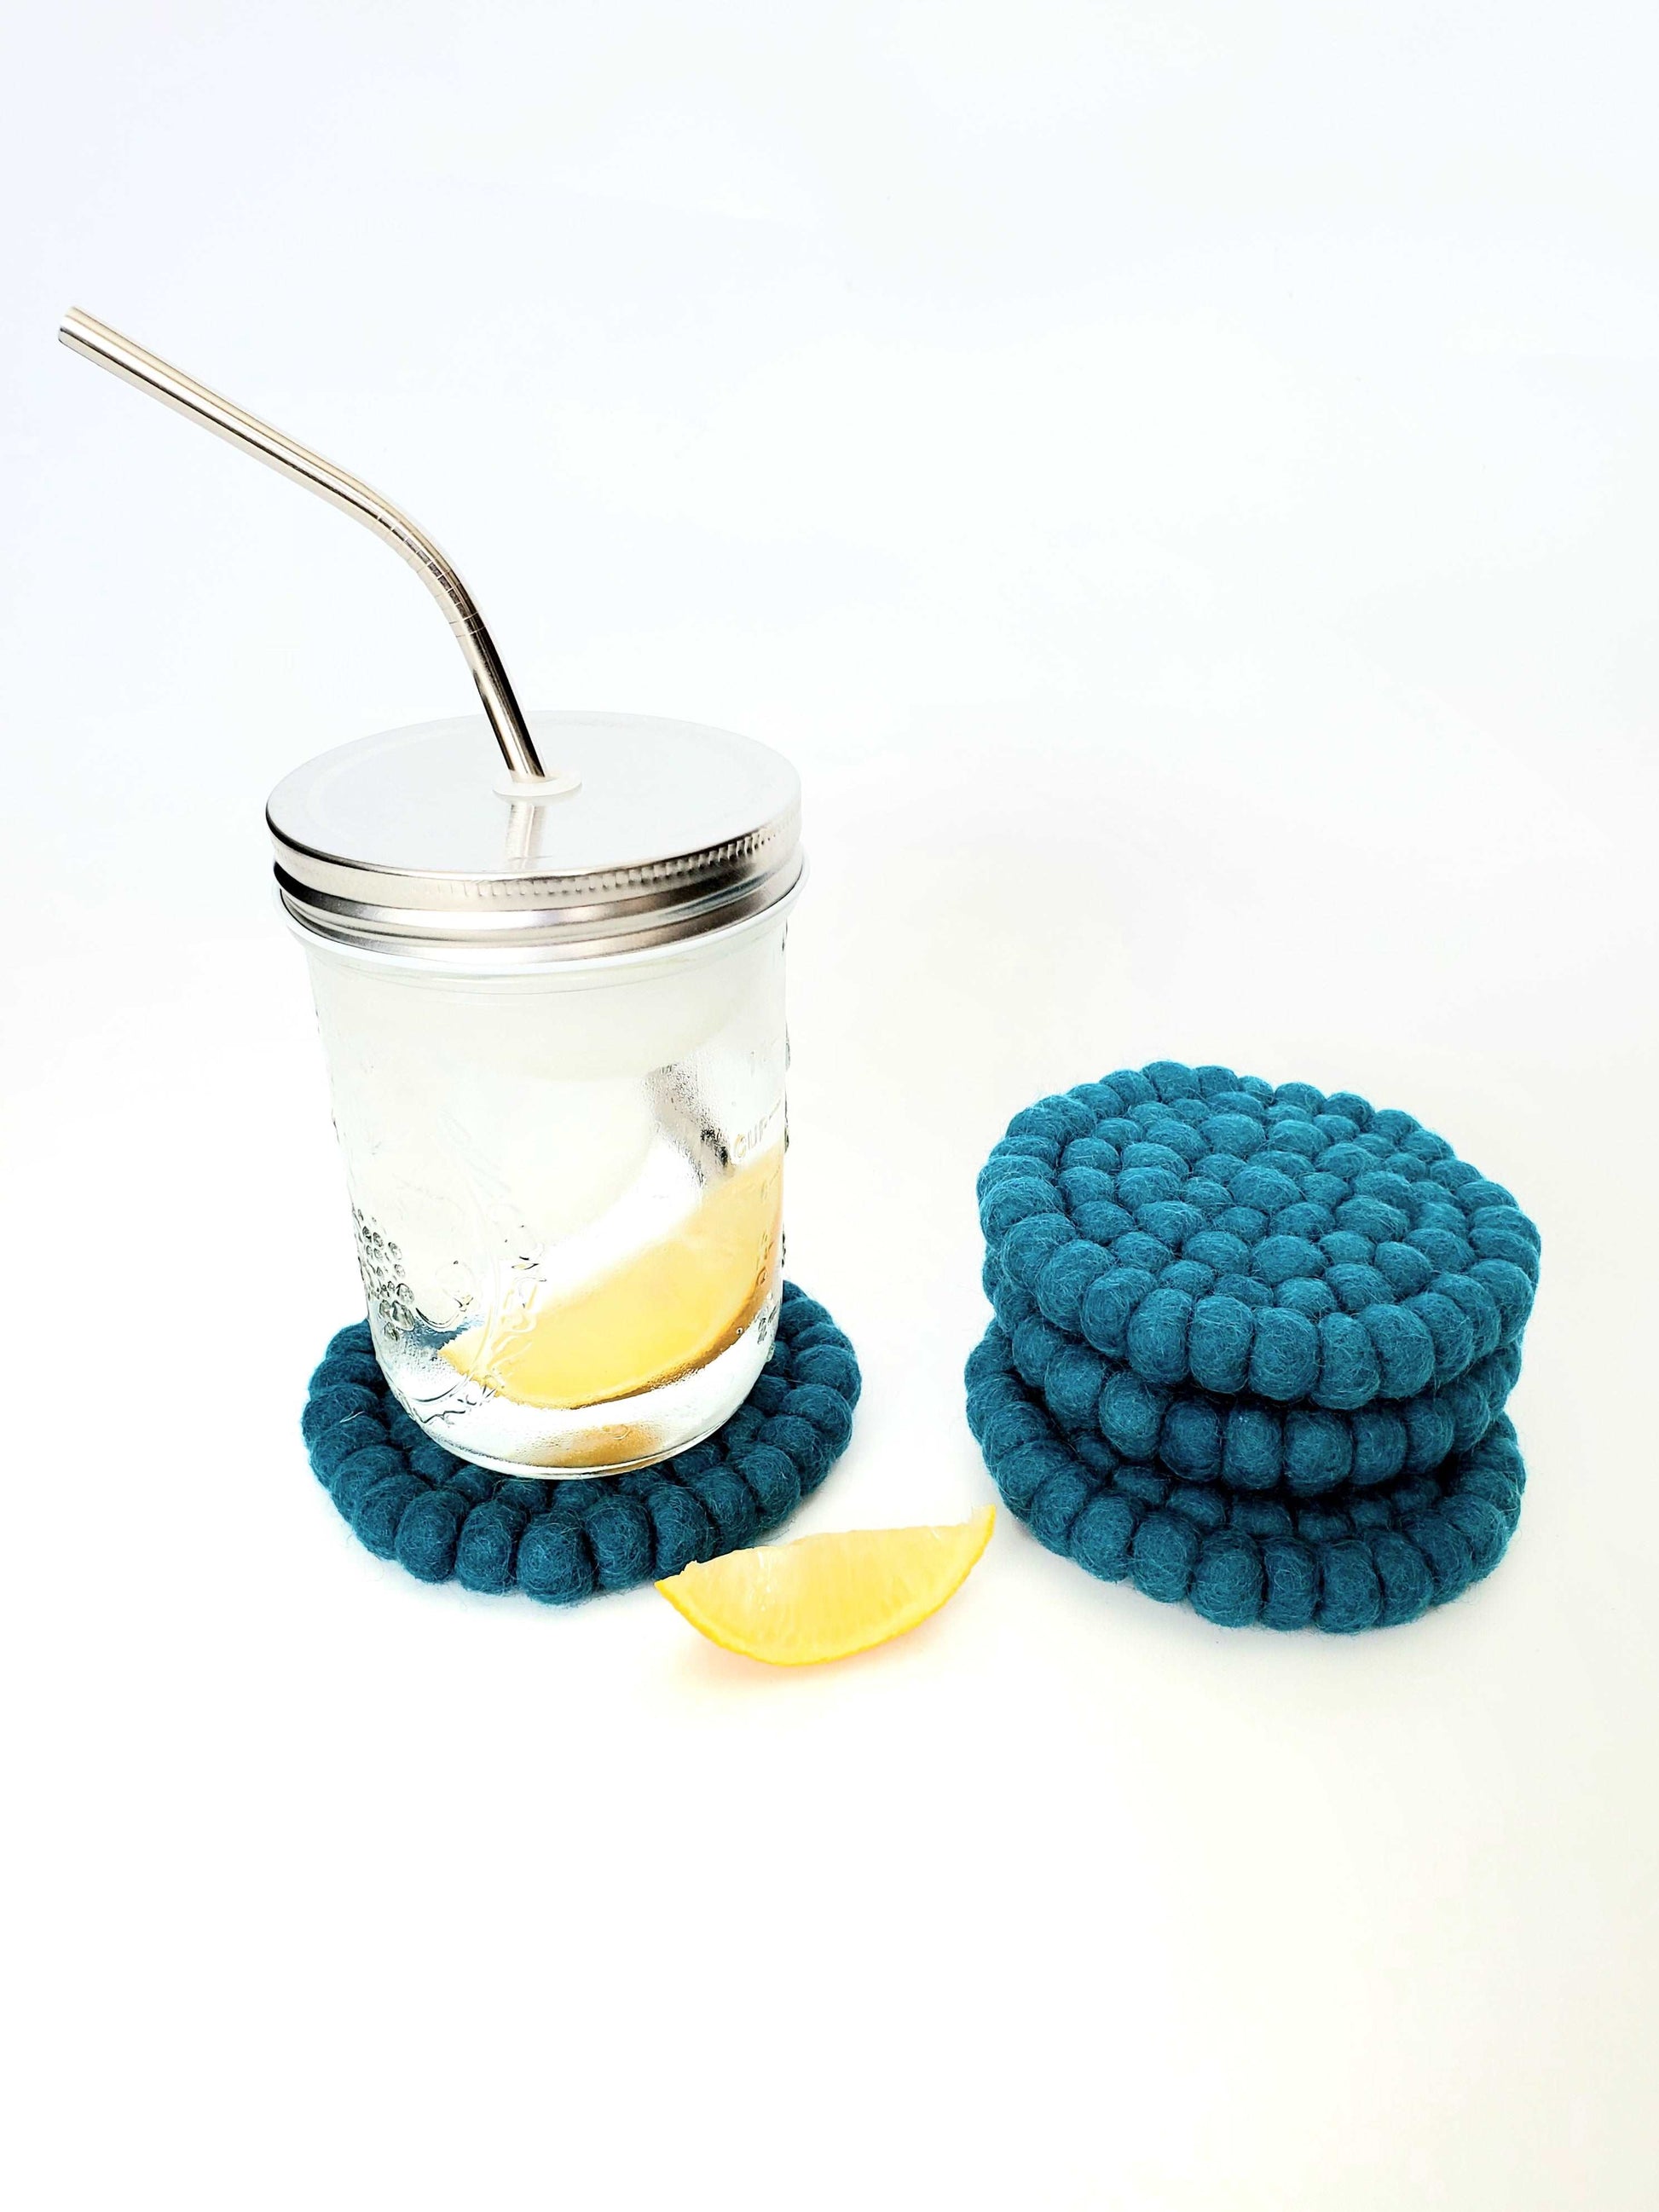 This Global Groove Life, handmade, ethical, fair trade, eco-friendly, sustainable, felt Teal coaster set was created by artisans in Kathmandu Nepal and will bring colorful warmth and functionality to your table top.